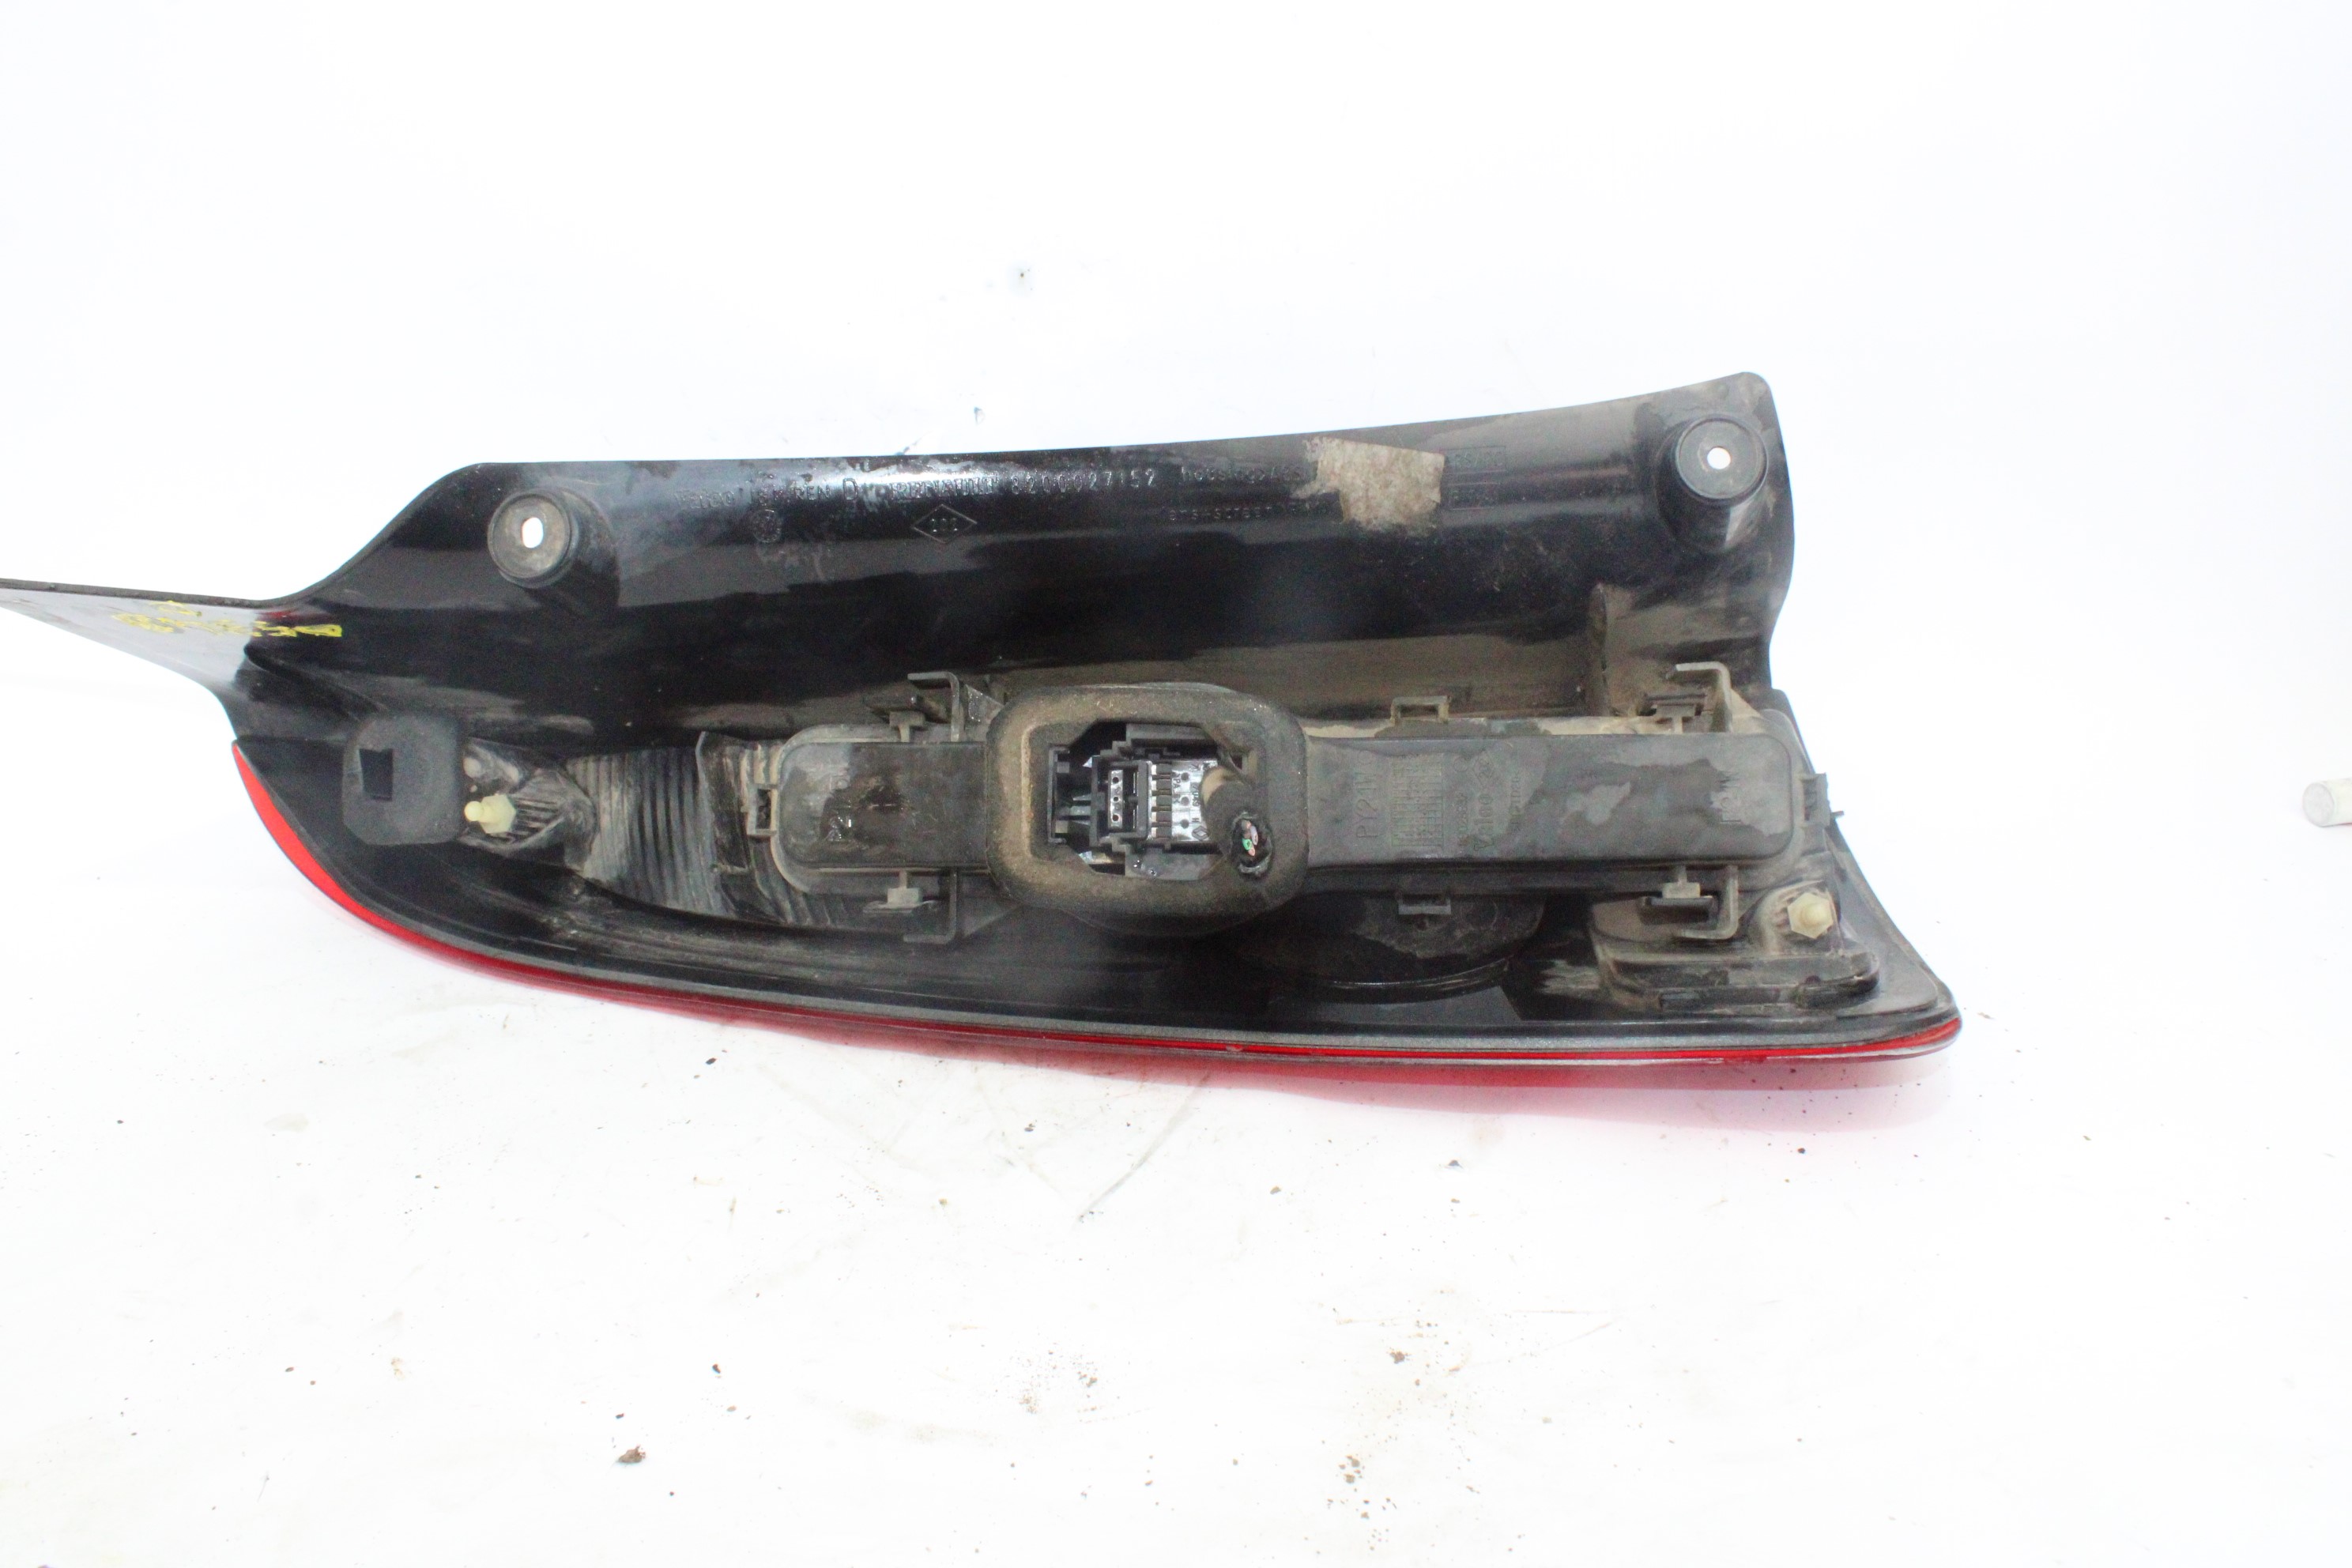 RENAULT Espace 4 generation (2002-2014) Rear Right Taillight Lamp 8200027152 23767380